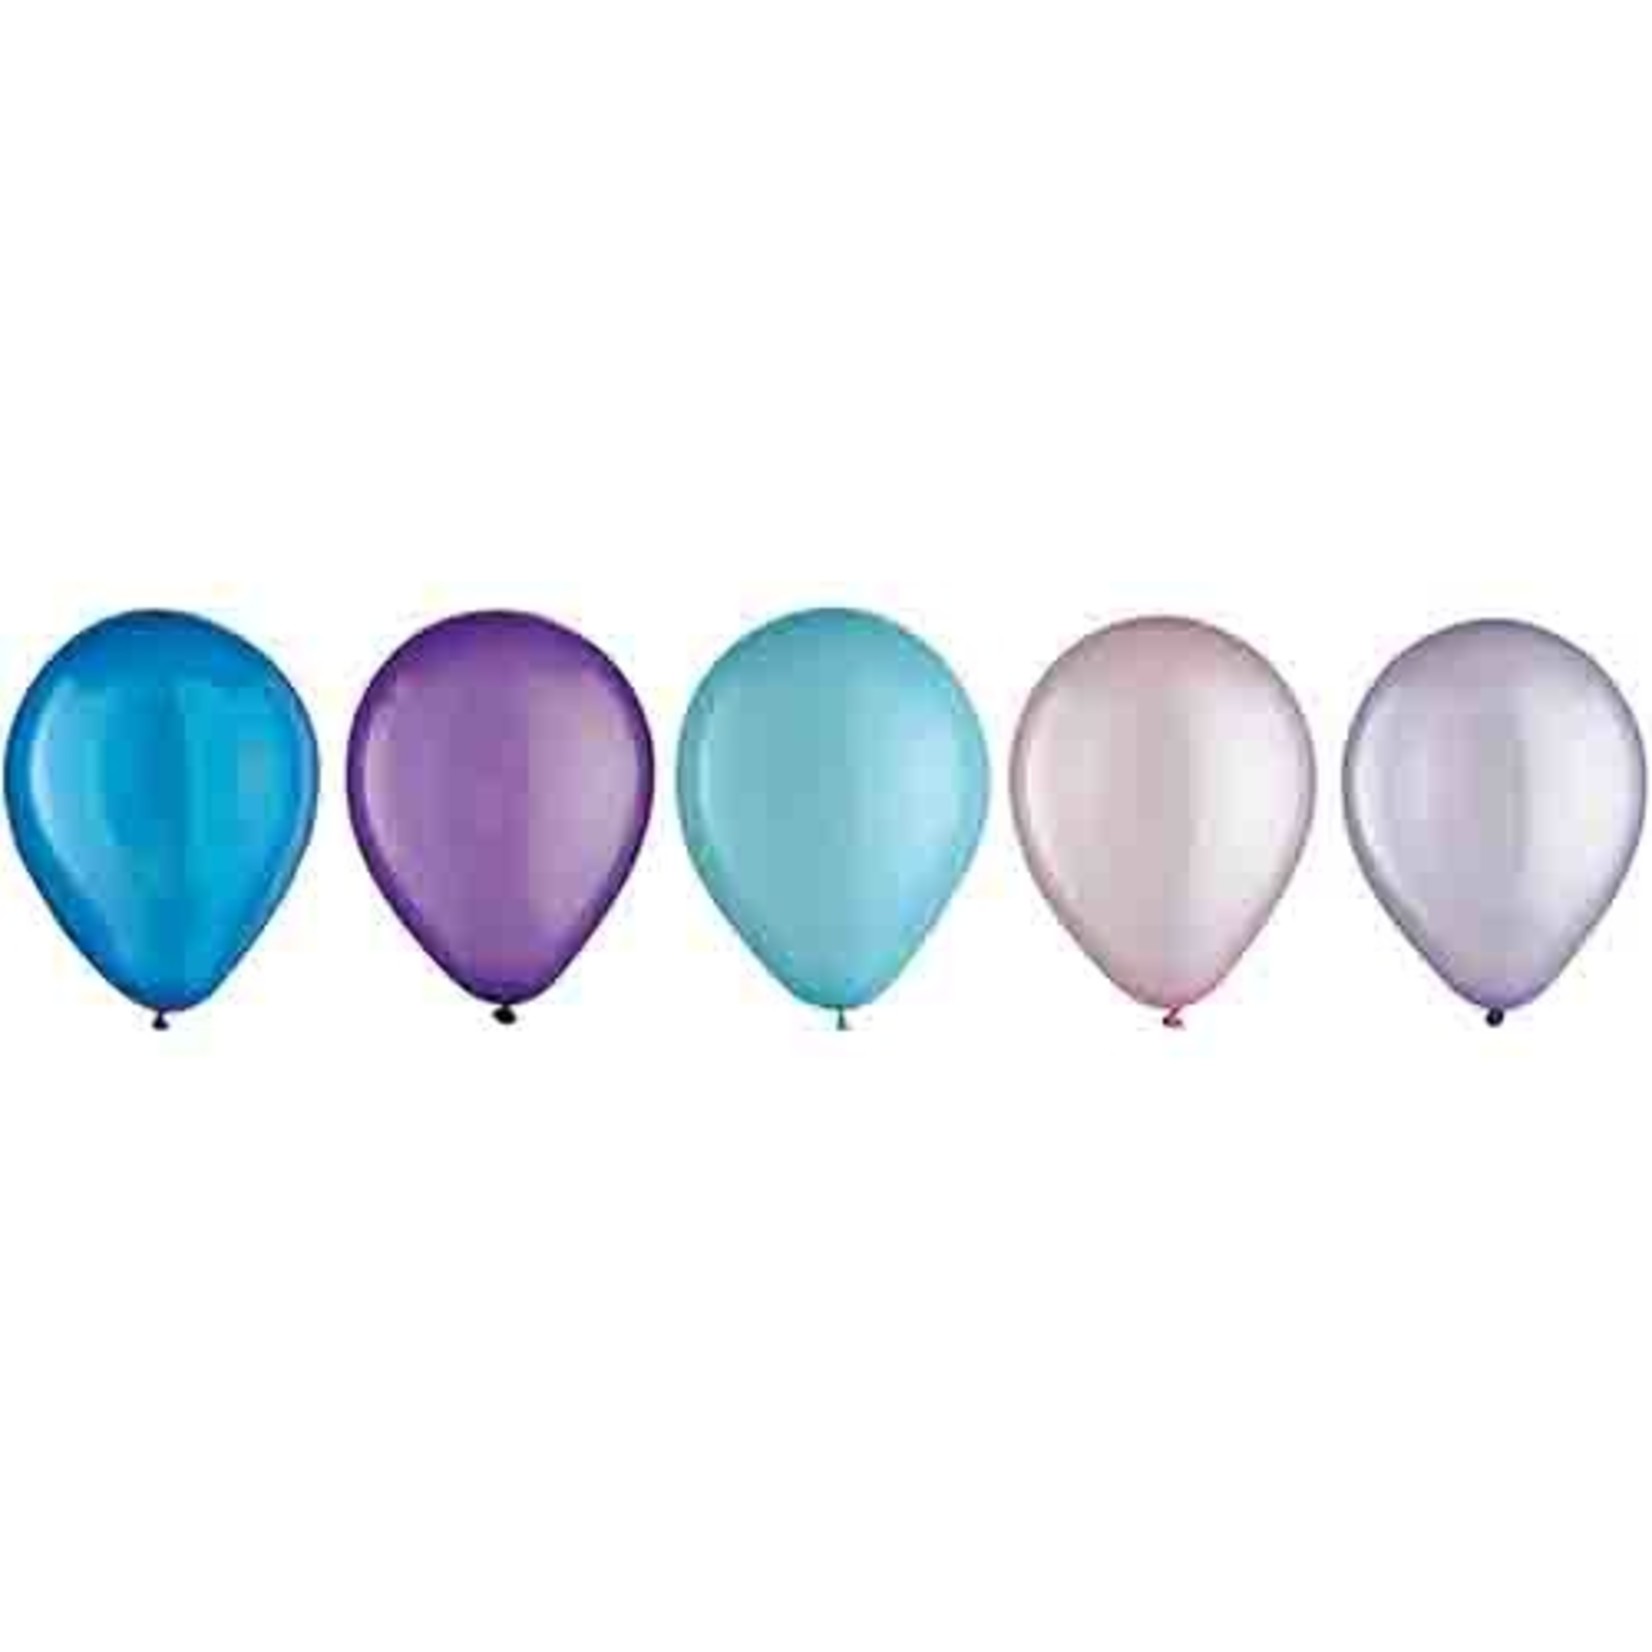 Amscan 5" Cosmic Pearlized Latex Balloons - 25ct.